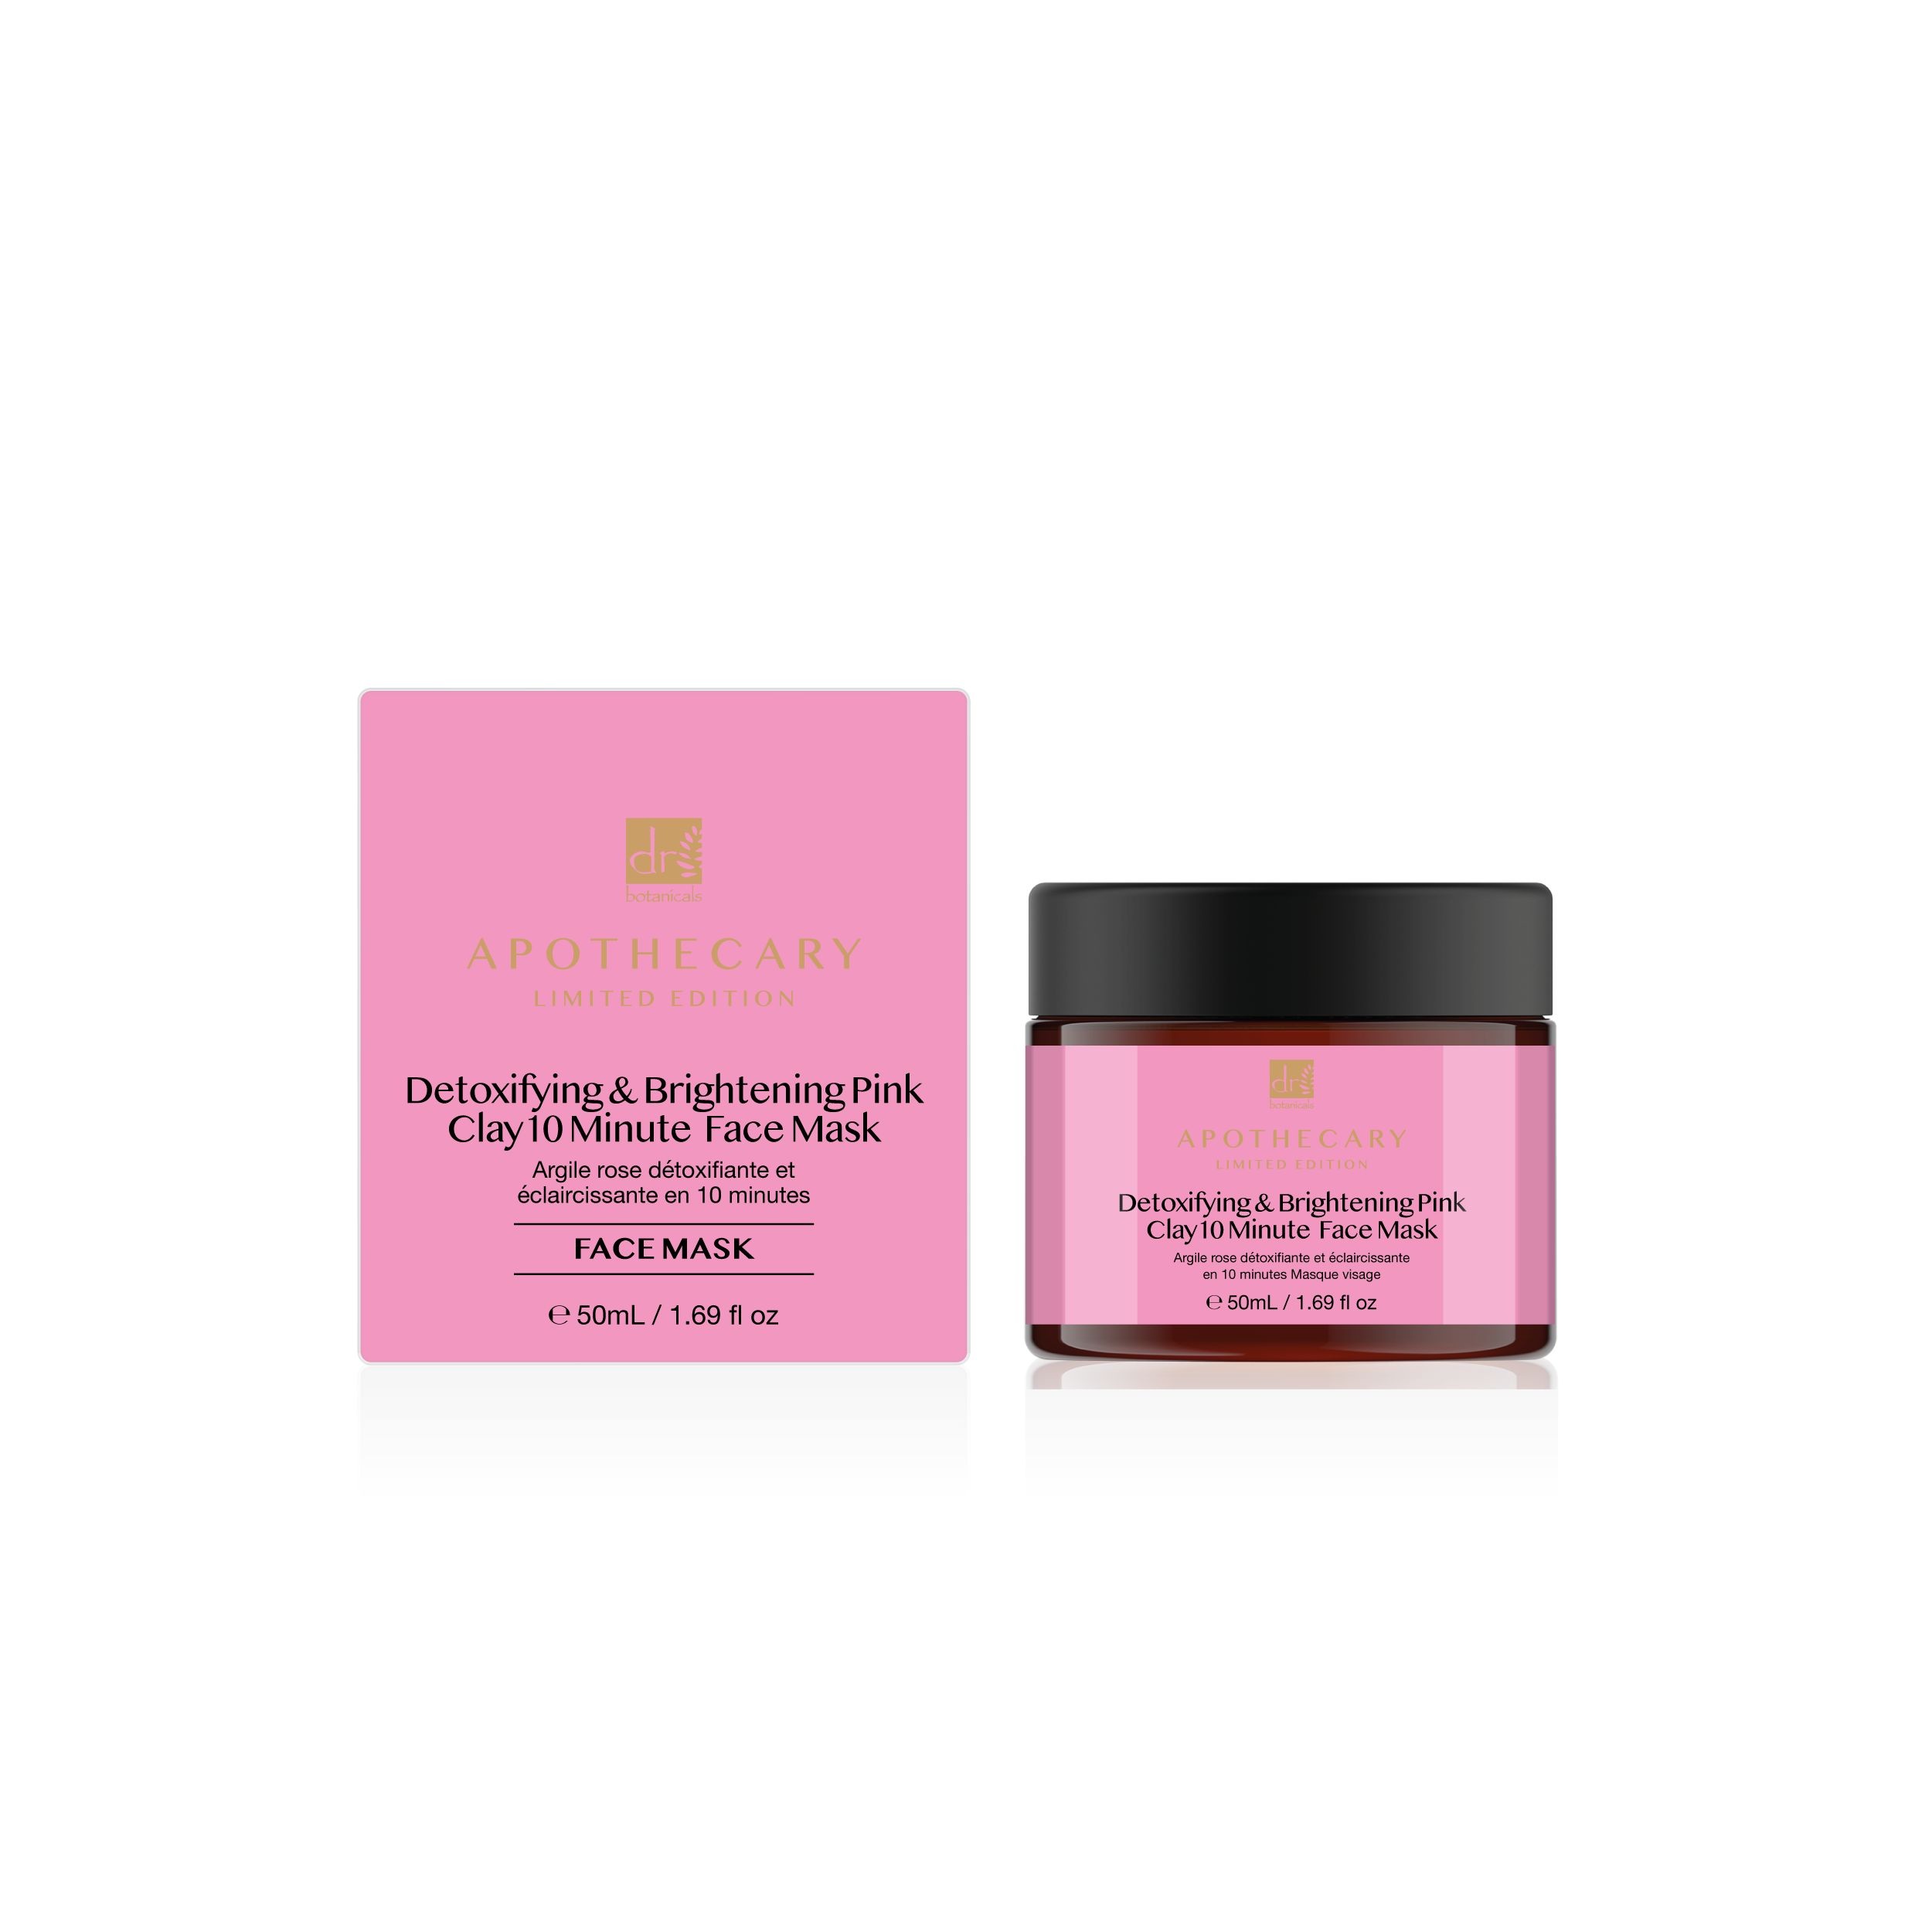 Dr Botanicals Detoxifying & Brightening Pink Clay 10 Minute Face Mask